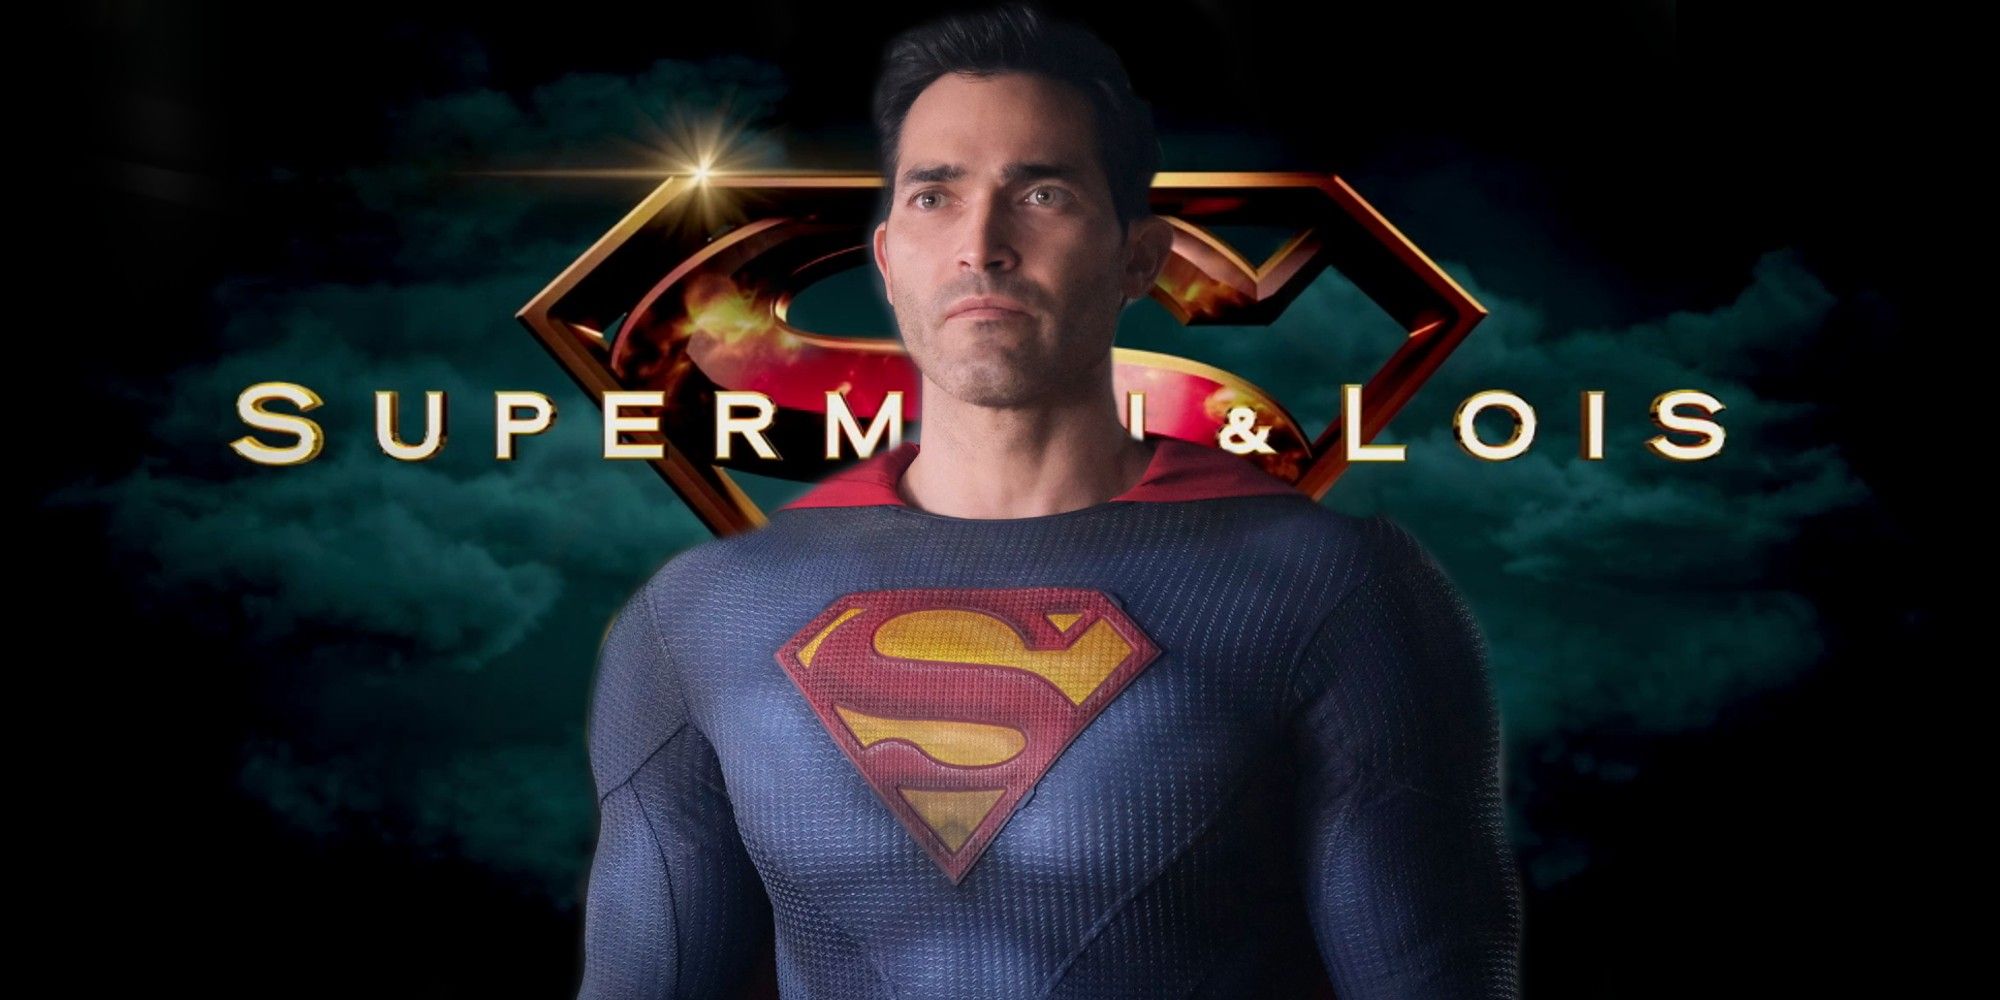 Superman & Lois Season 2 Has Fixed The Biggest Arrowverse Supes Issue